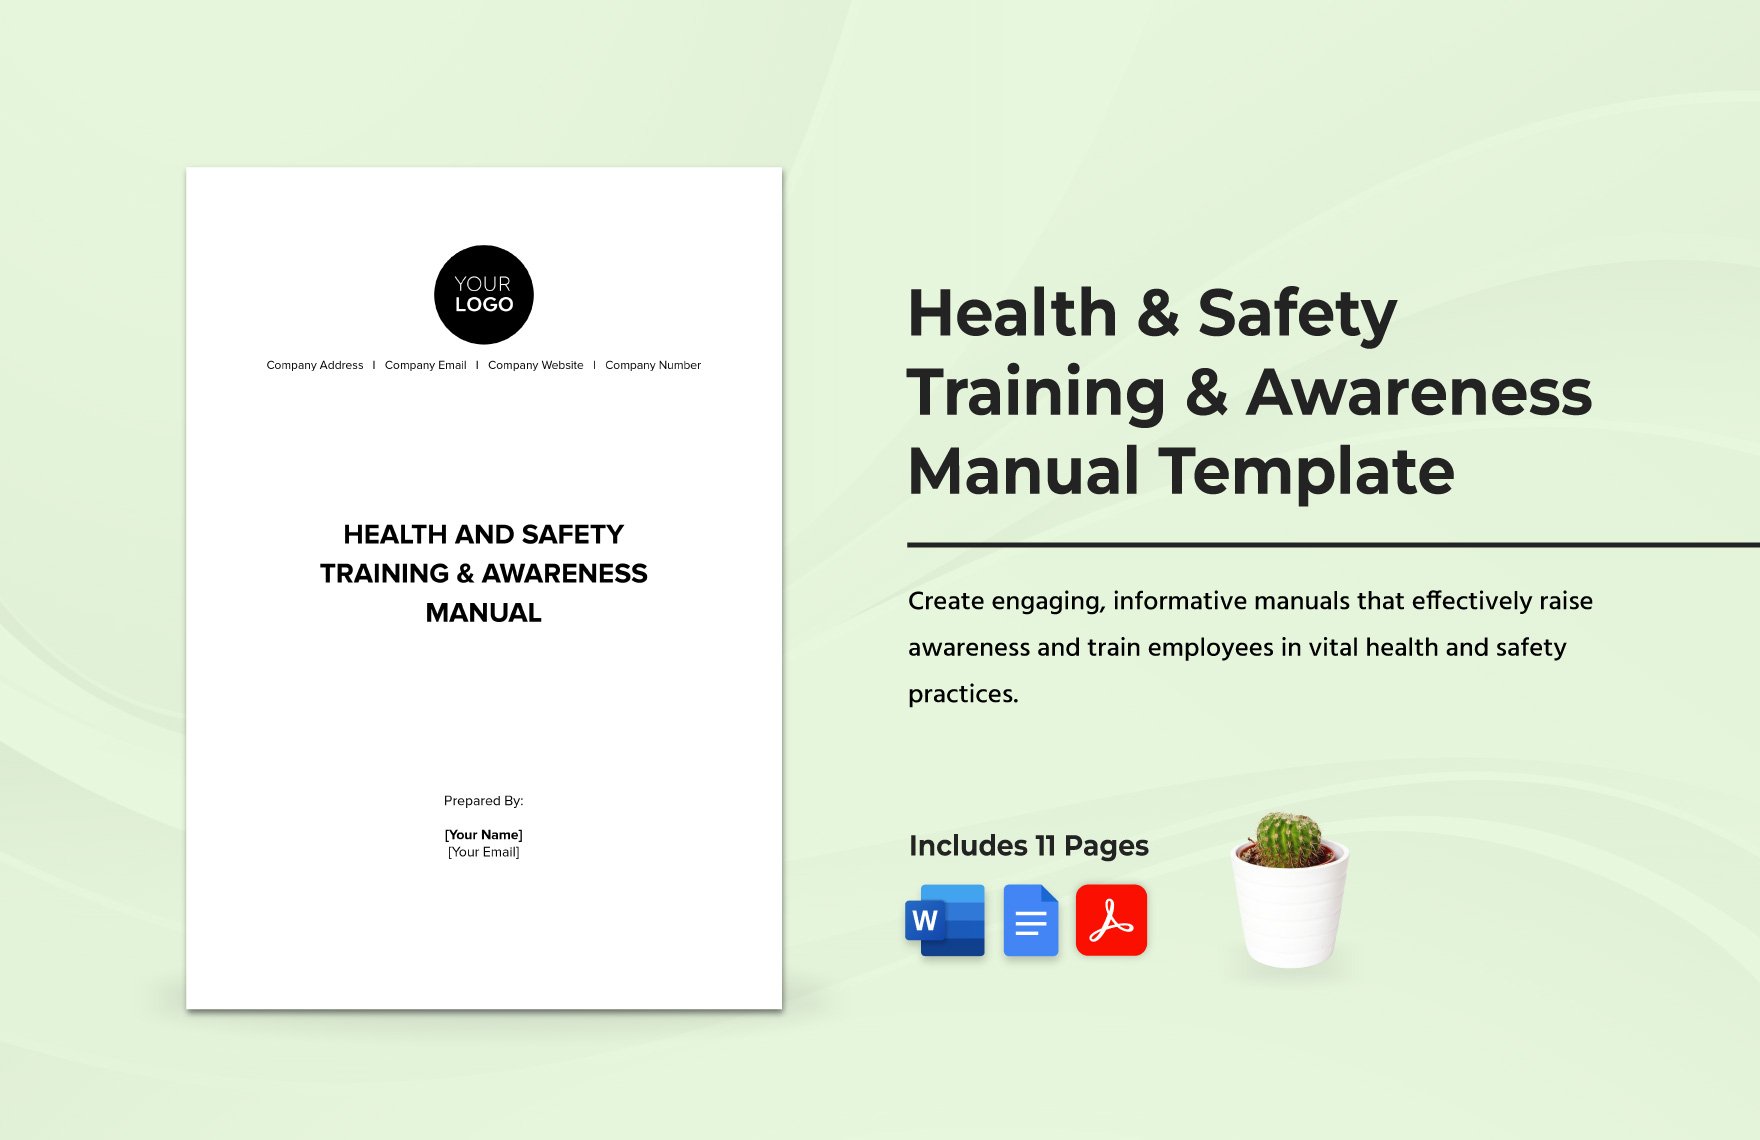 Health & Safety Training & Awareness Manual Template